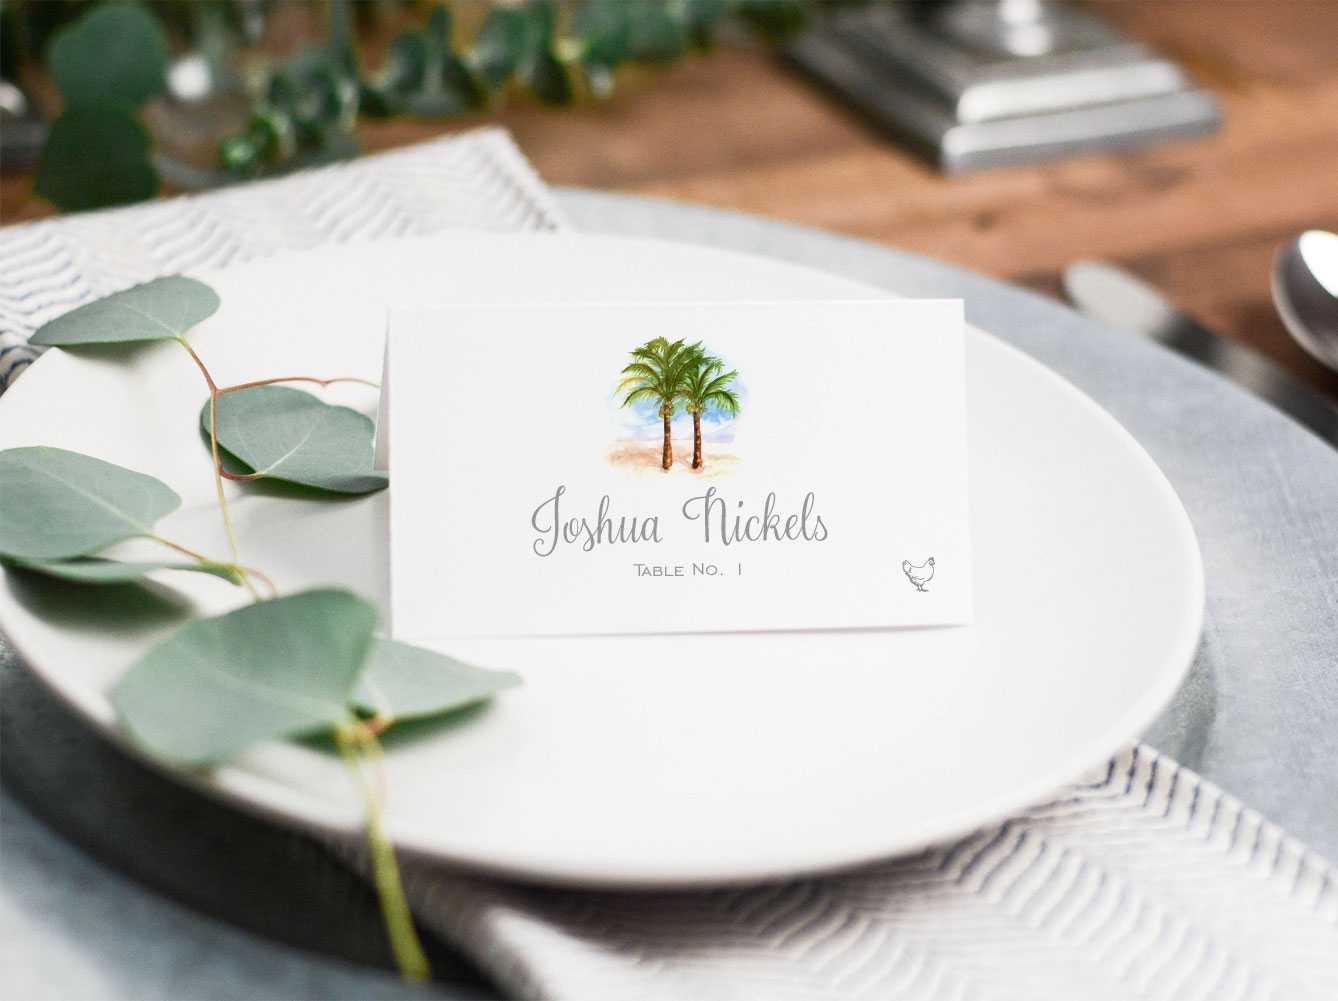 Wedding Place Cards Etiquette | Mospens Studio With Christmas Table Place Cards Template